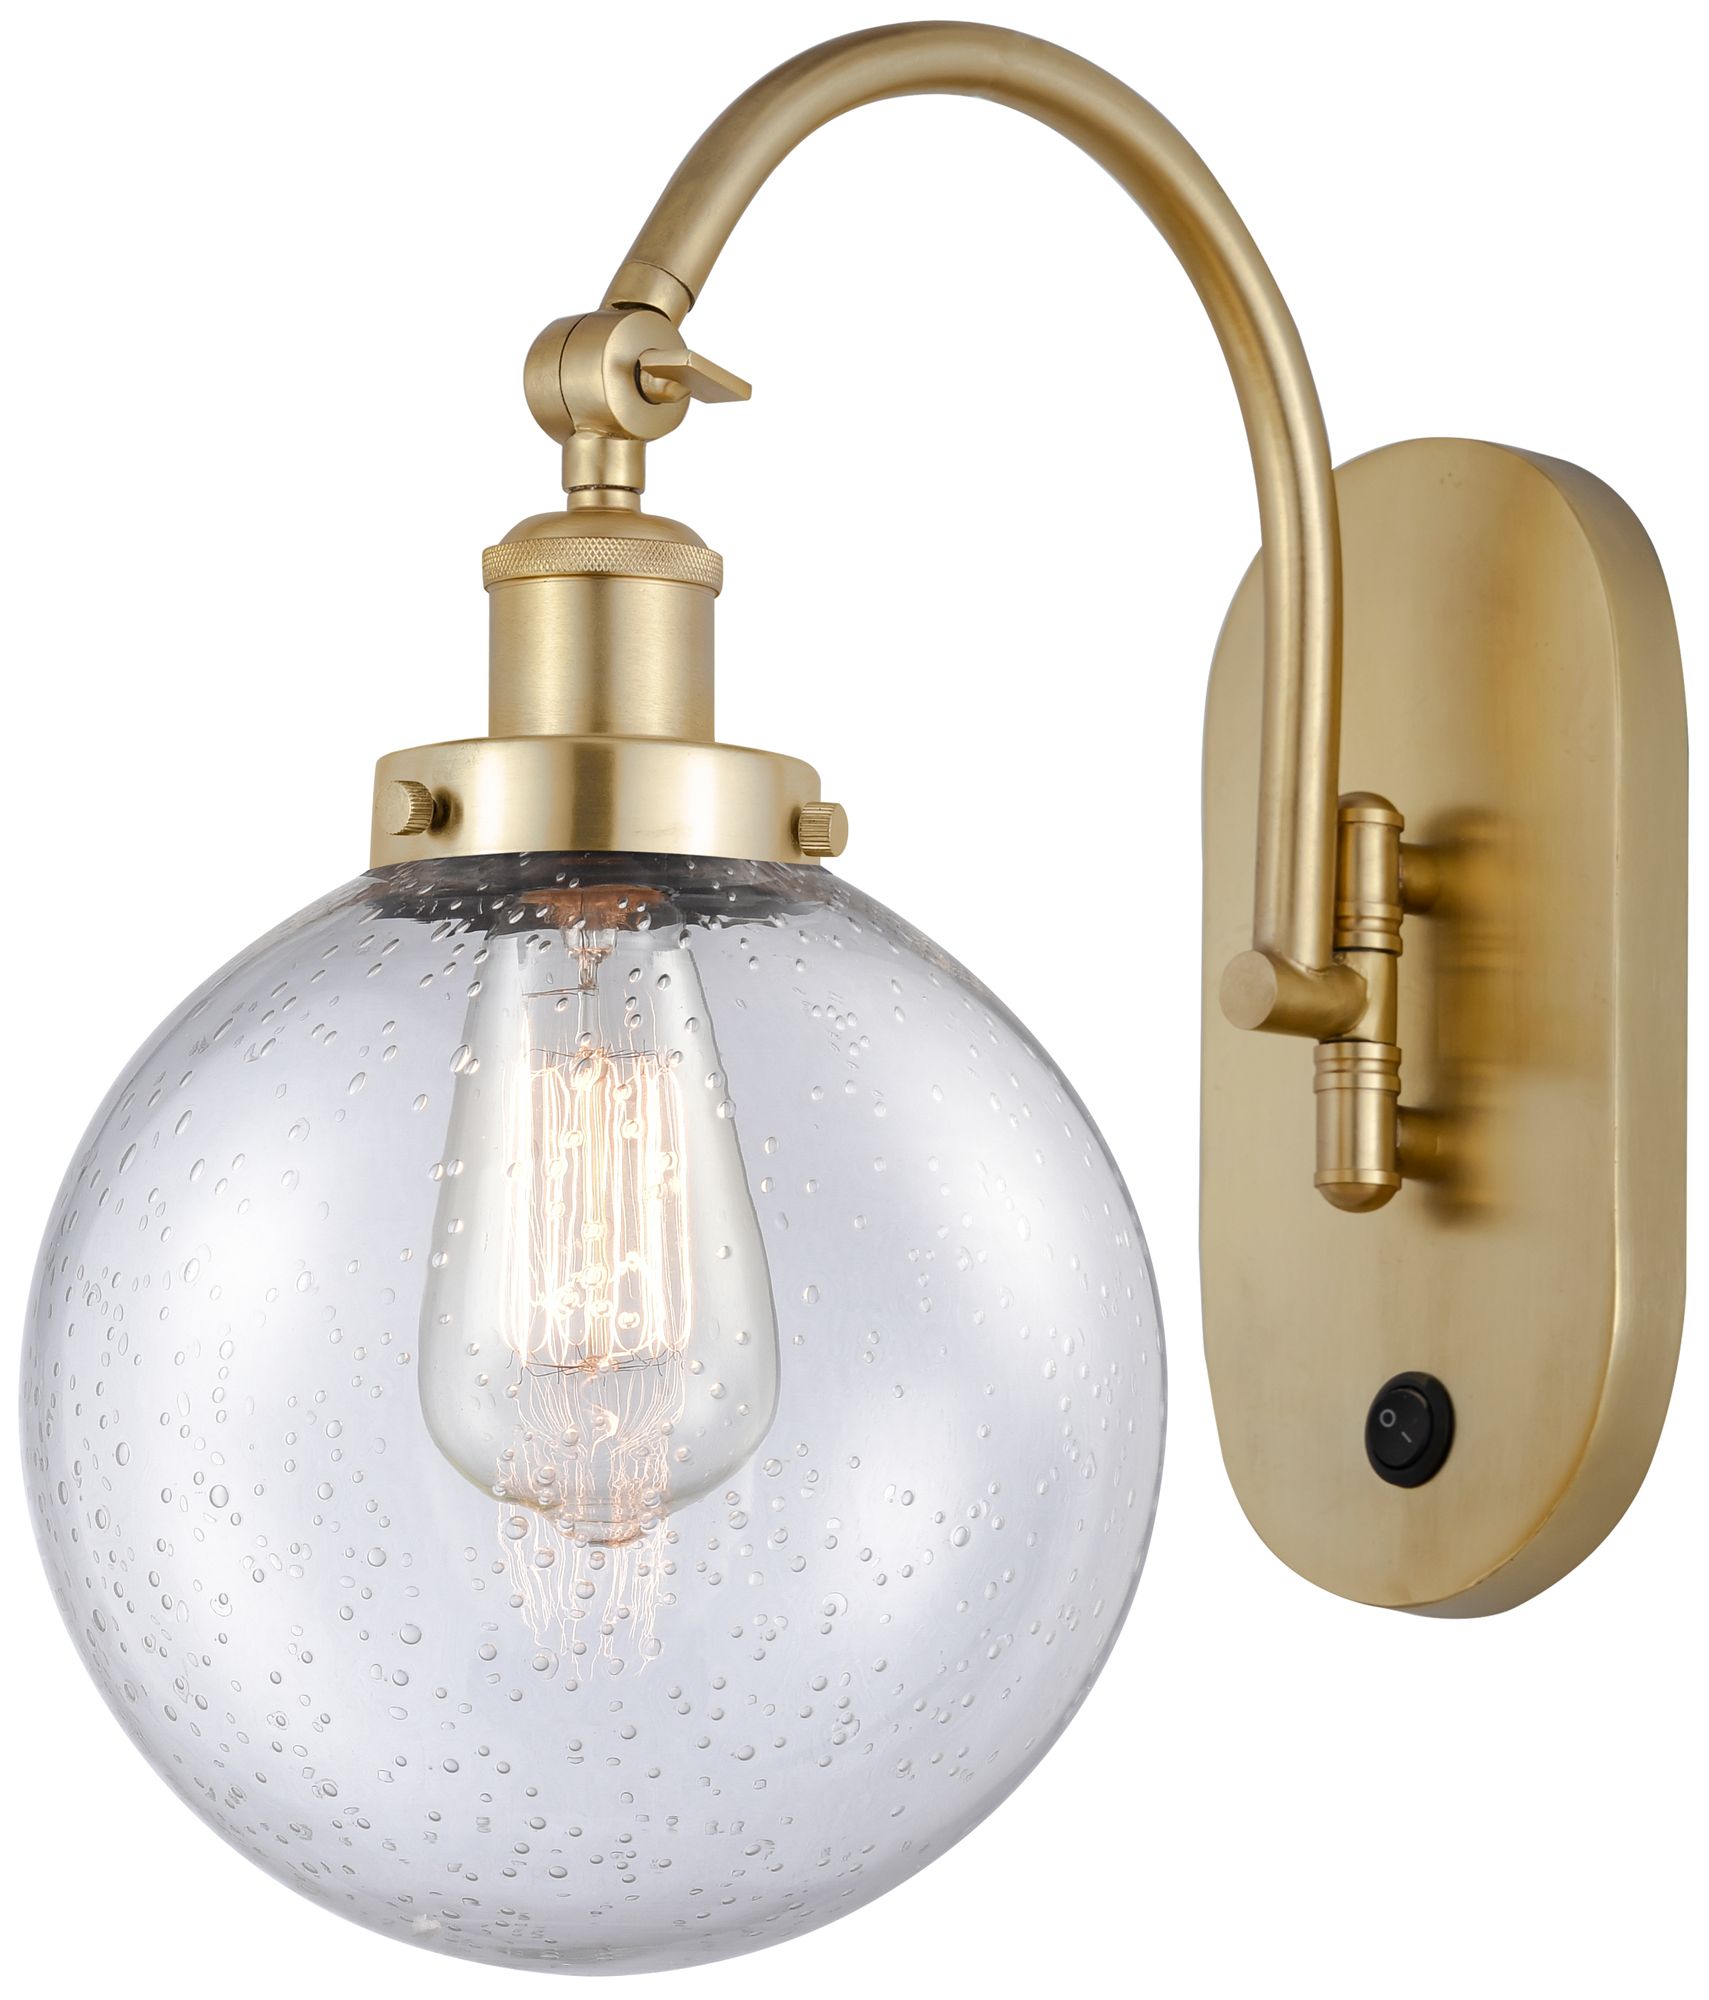 Franklin Restoration Beacon 8" Incandescent Sconce - Gold - Seedy Shad